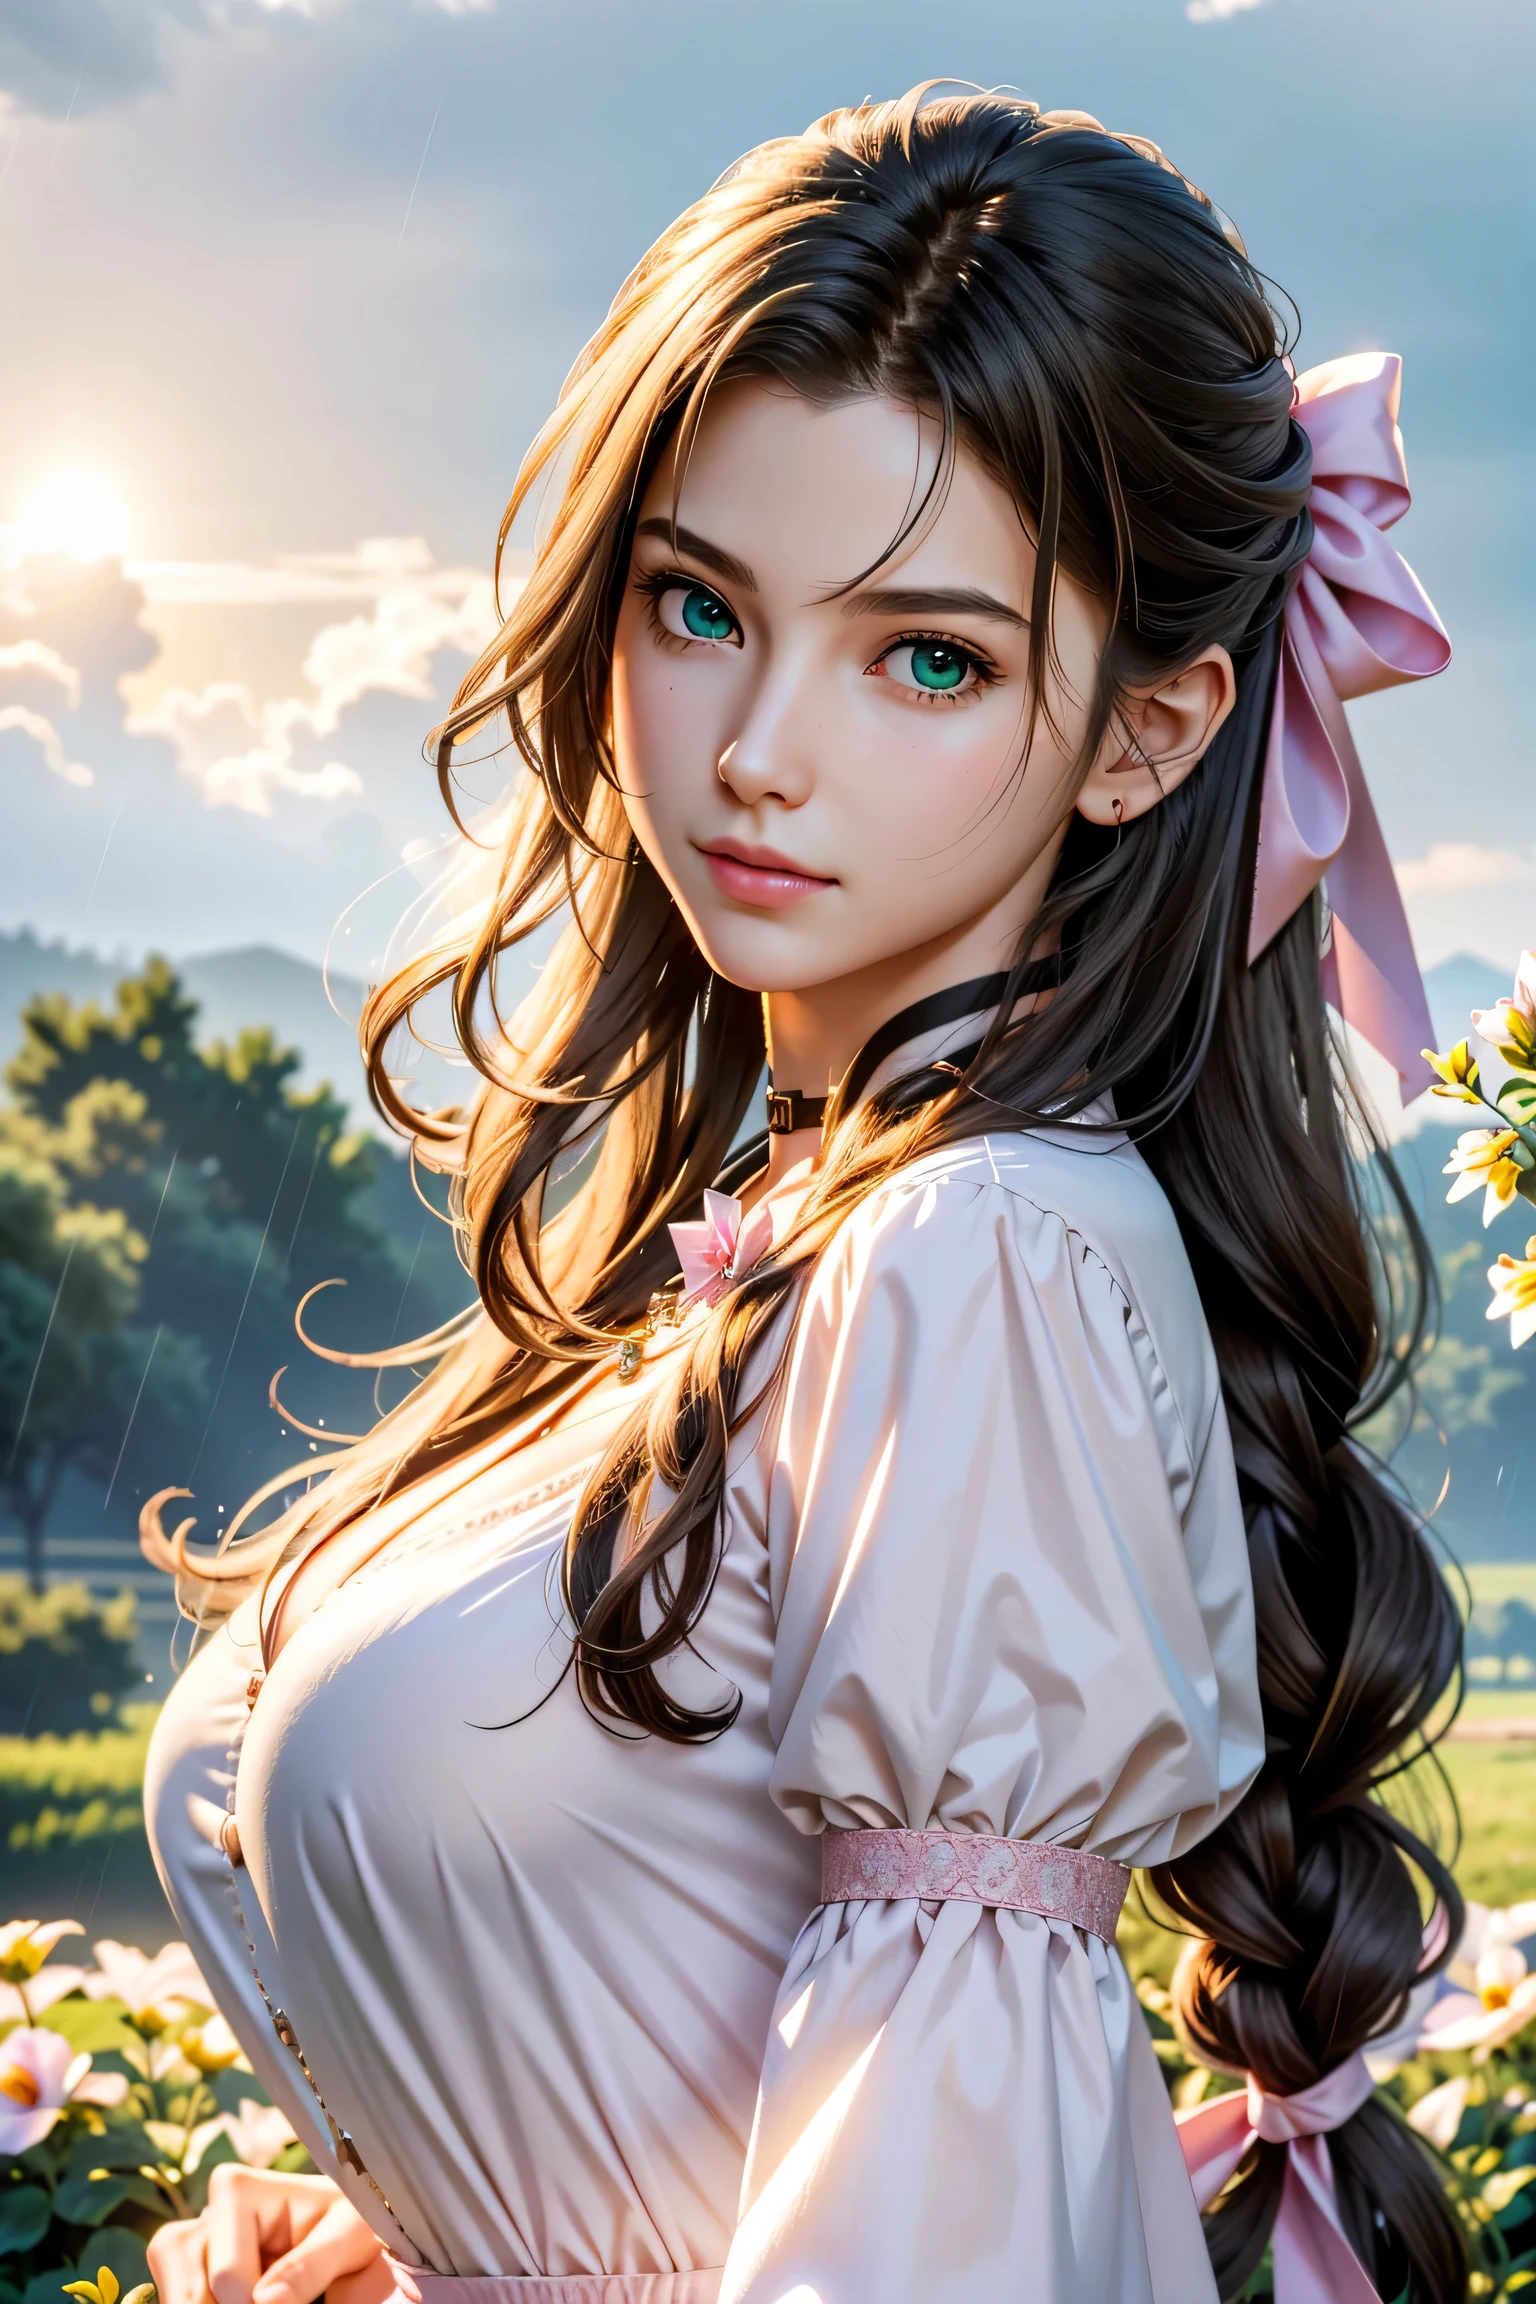 (masterpiece, 最high quality)
Aeris FF7, 1 Girl, alone, Long Hair, bangs, Brown Hair, dress, bow, ribbon, jewelry, Closed Mouth, Green Eyes, Red jacket, hair pink ribbon, Upper Body, Braid, hair bow, Side Lock, choker, necklace, lips, parted bangs, pink bow, Portraiture, Pink dress,  Photorealistic,Ultra HD,high quality,masterpiece,Digital SLR,Detailed details,Intricate details,Anatomical basis,Depicted in detail,A detailed face,Realistic skin texture,Vivid details,Perfect Anatomy,Perfect Anatomy,Anatomically correct hand,Anatomically correct fingers,Super Detail,Complex 3D rendering,Huge ,Sexy pose,Beautiful morning glory(flower),Rainy Sky,Beautiful scenery,Fantastic rainy sky,Picturesque,Pink Lips,smile,Fantastic butterflies々,
